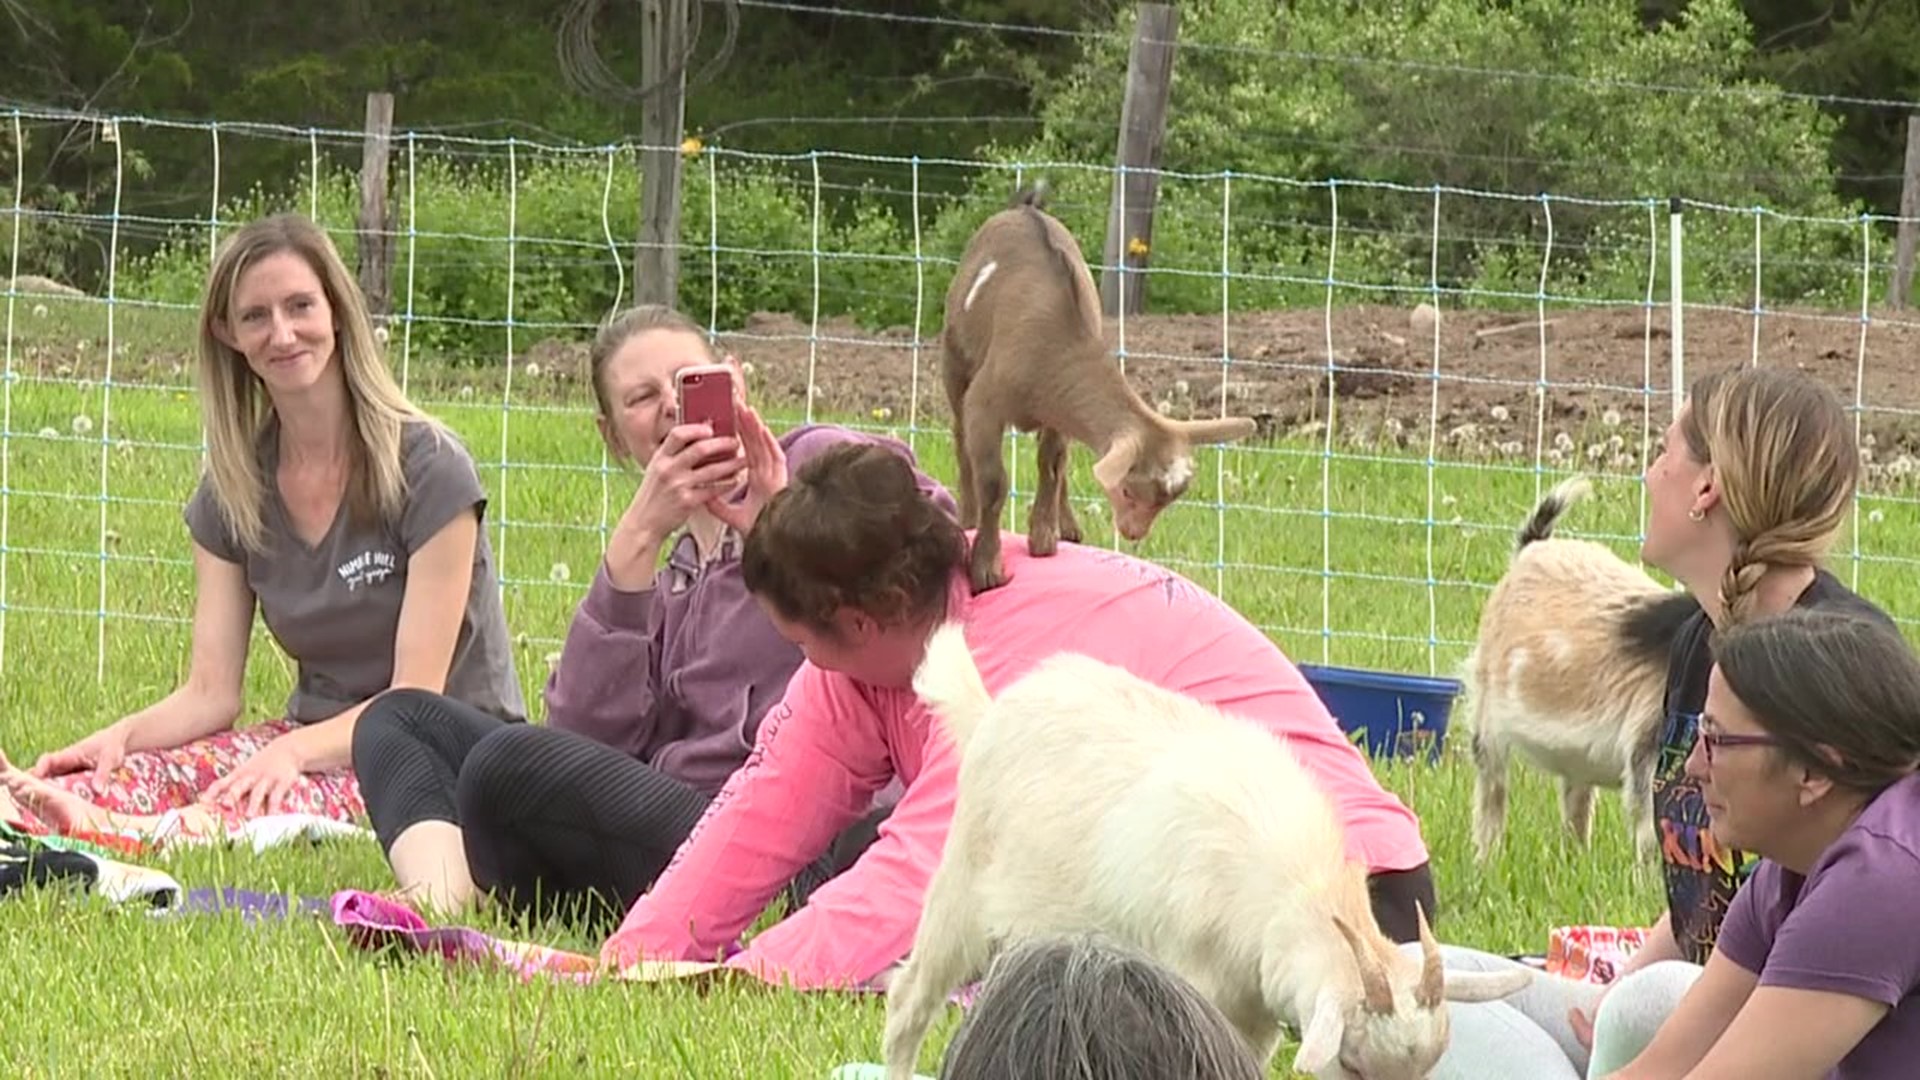 "Moms and Mimosas" featured nature and goats at Nimble Hill Goat Yoga.